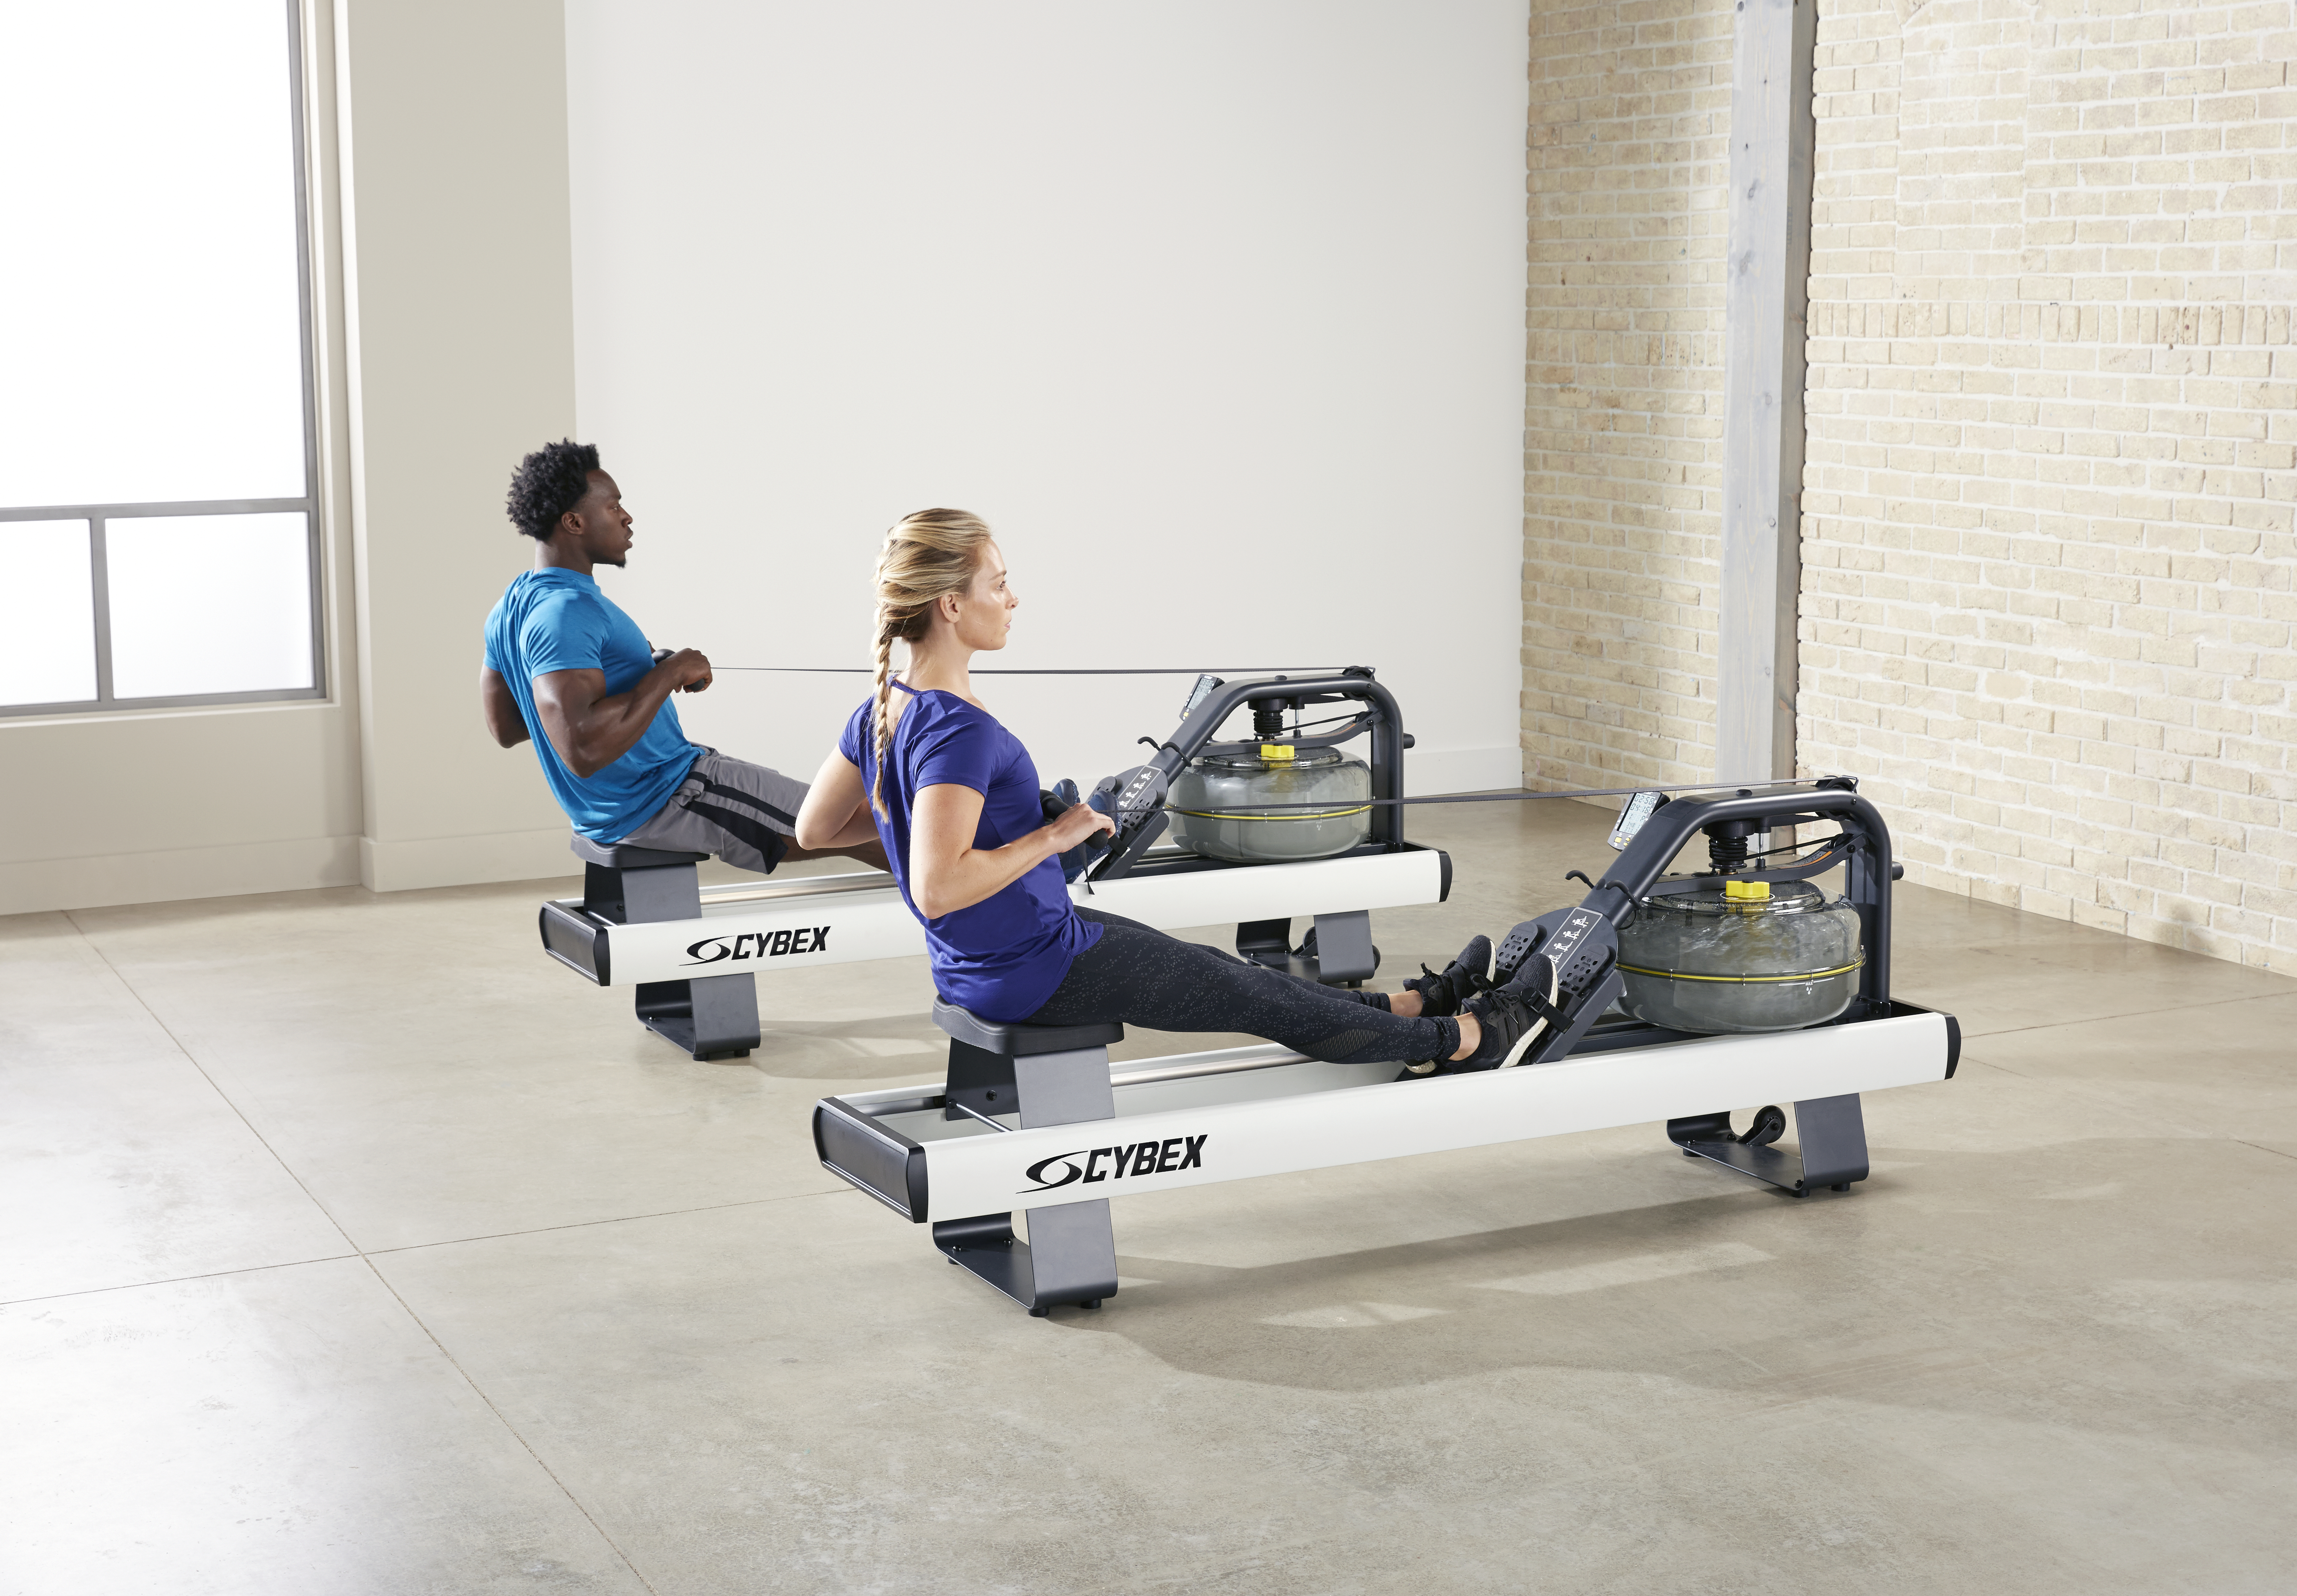 Cybex' Hydro Rower Pro features patented Fluid Technology Resistance